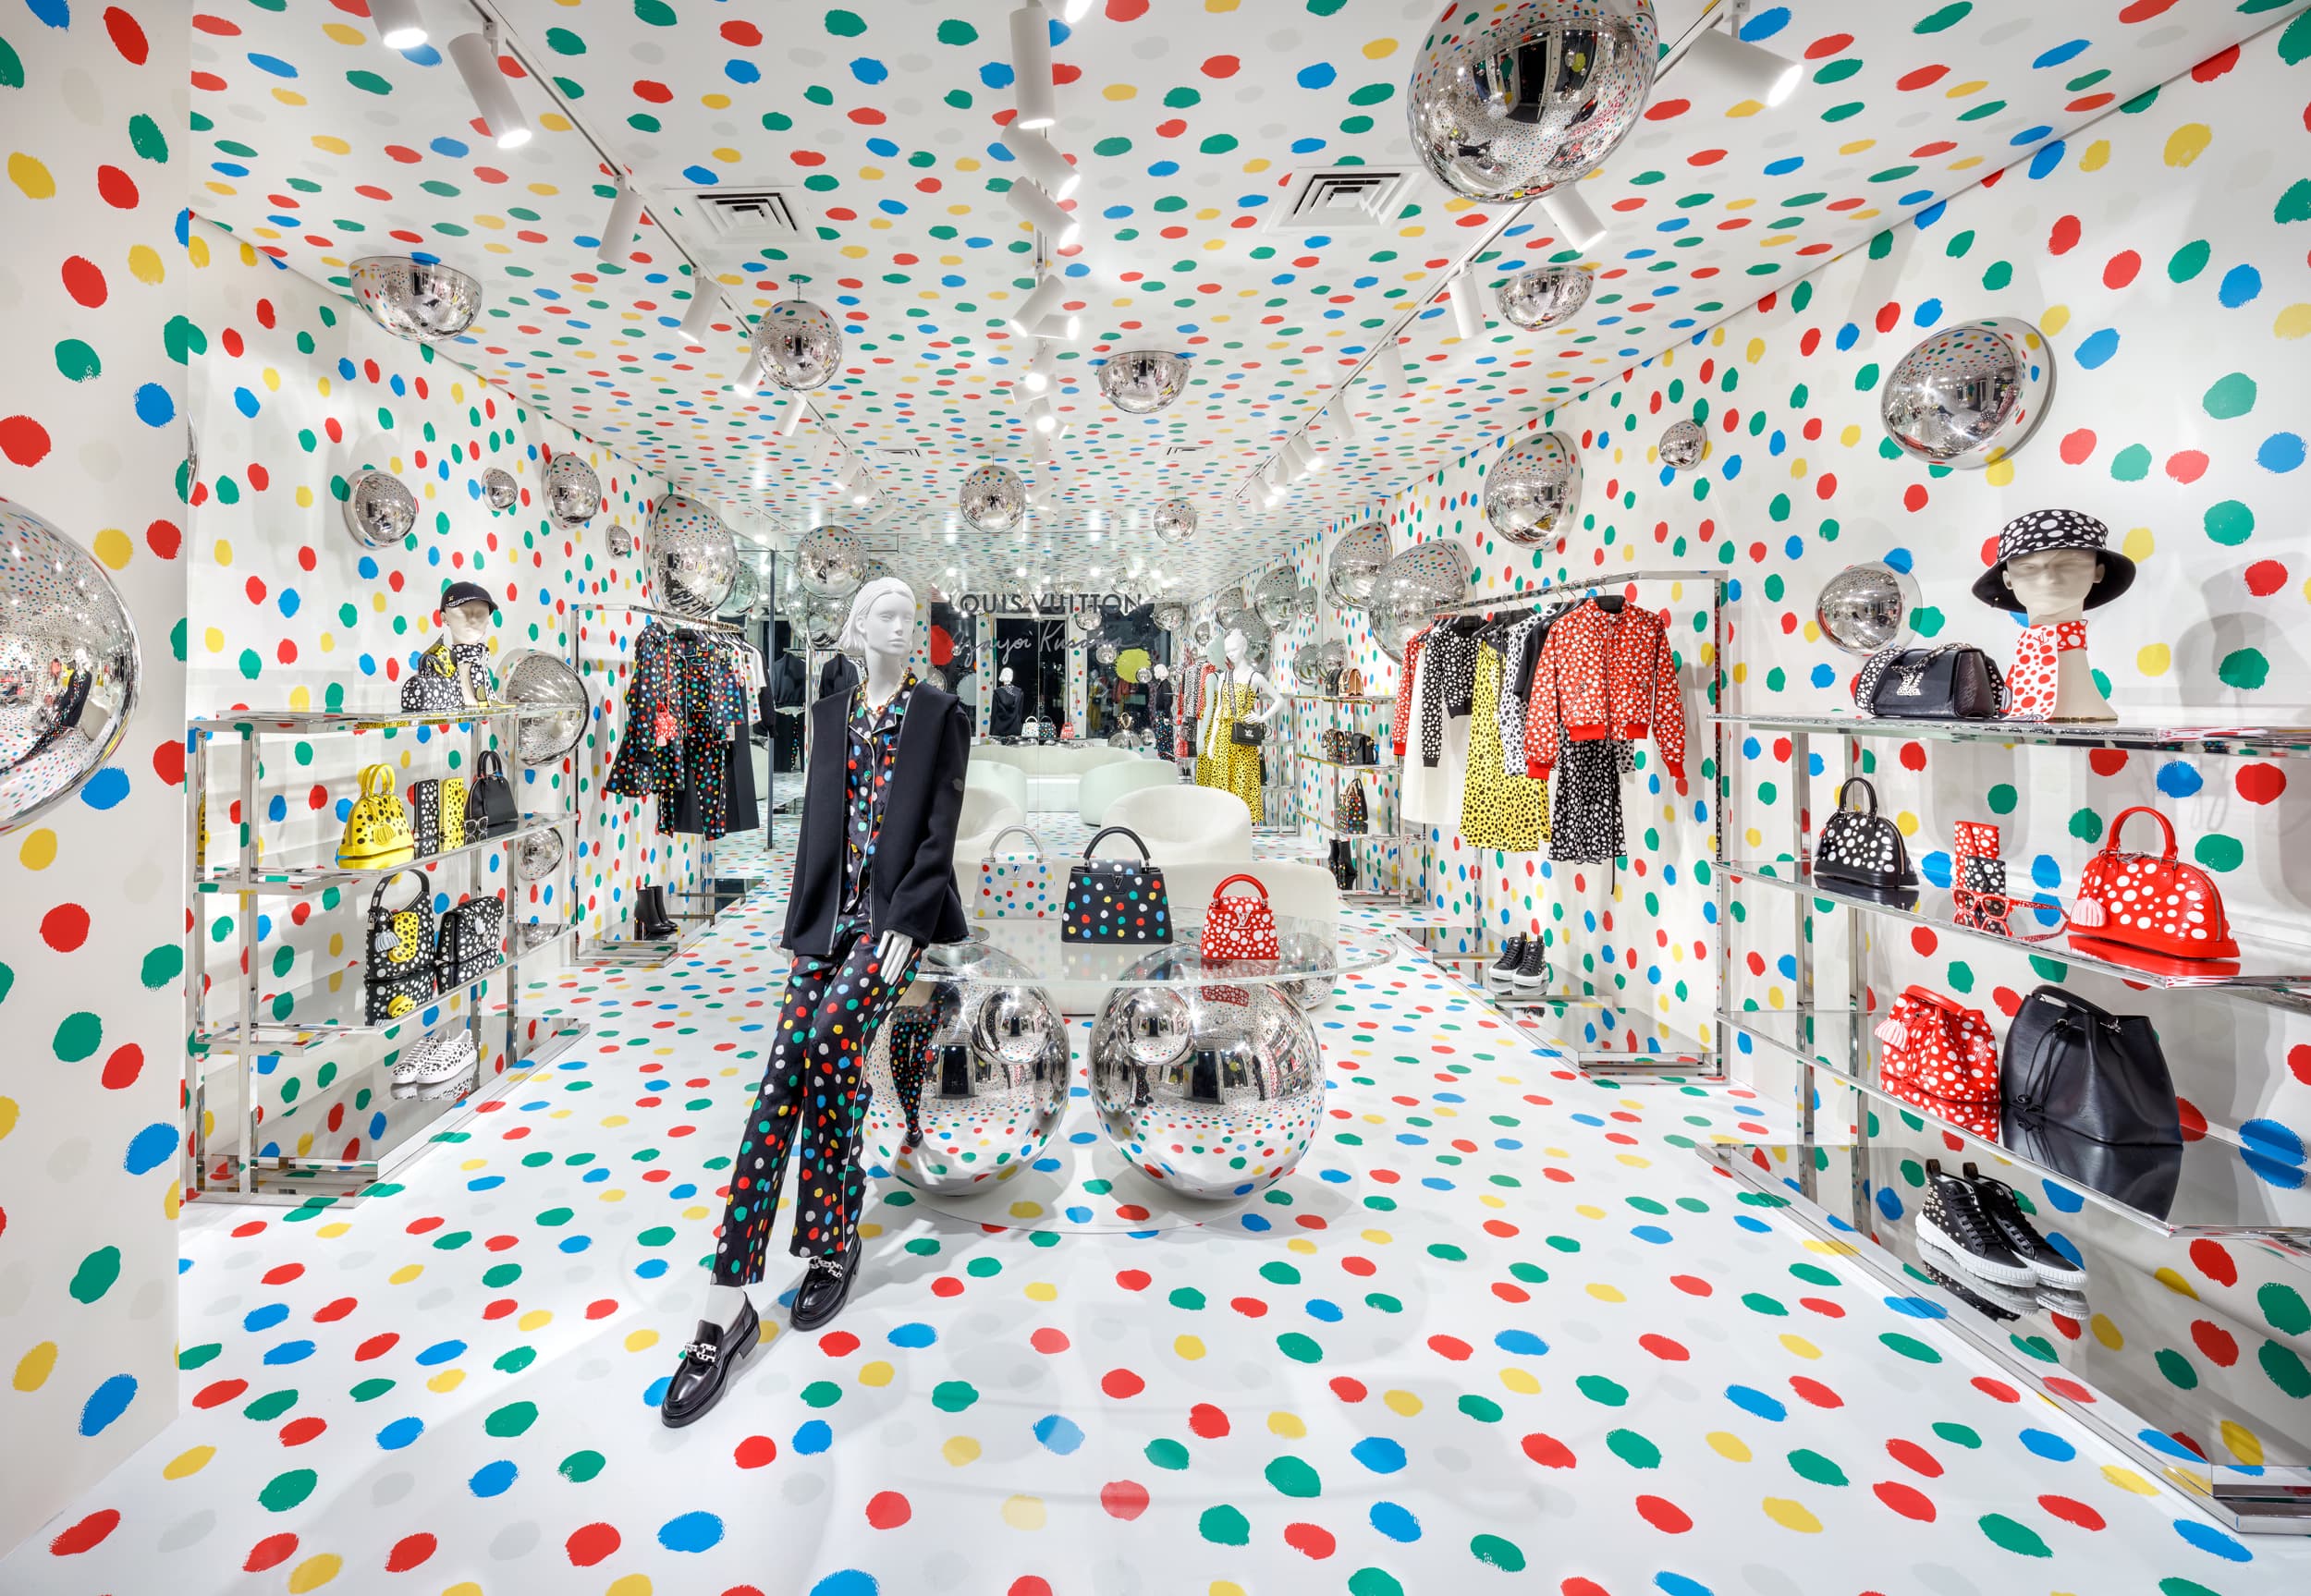 Harrods is painted in dots in latest Louis Vuitton x Kusama collaboration